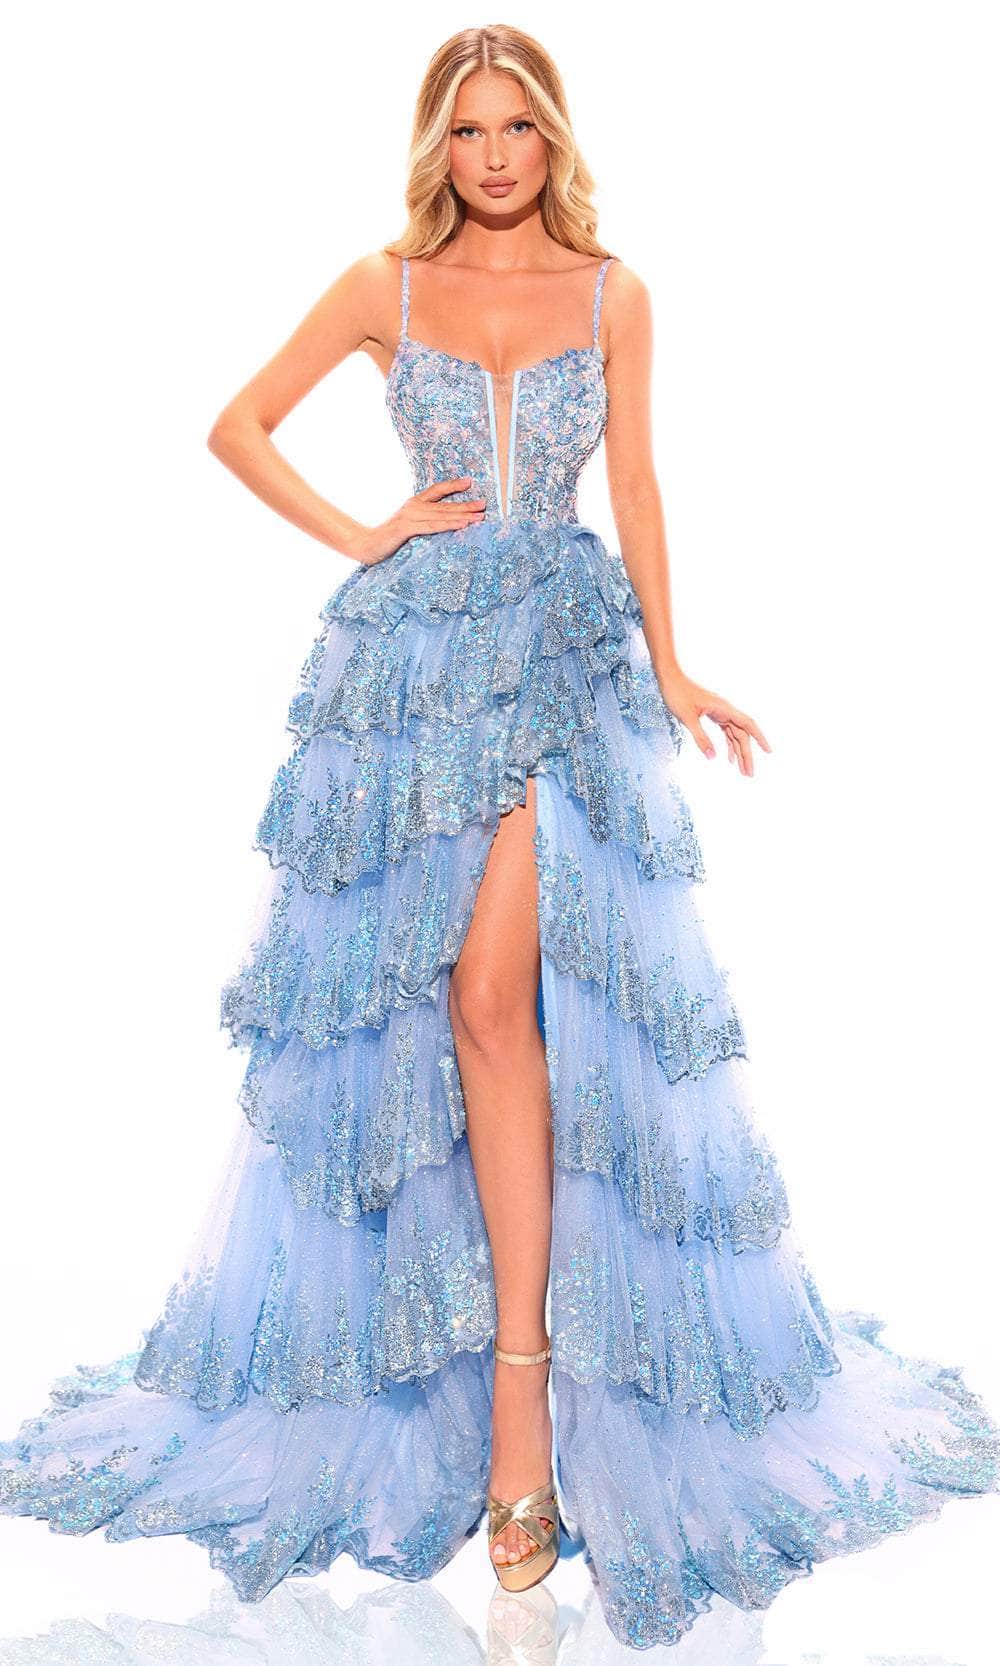 Image of Amarra 88745 - Scallop Tiered Prom Dress with Slit